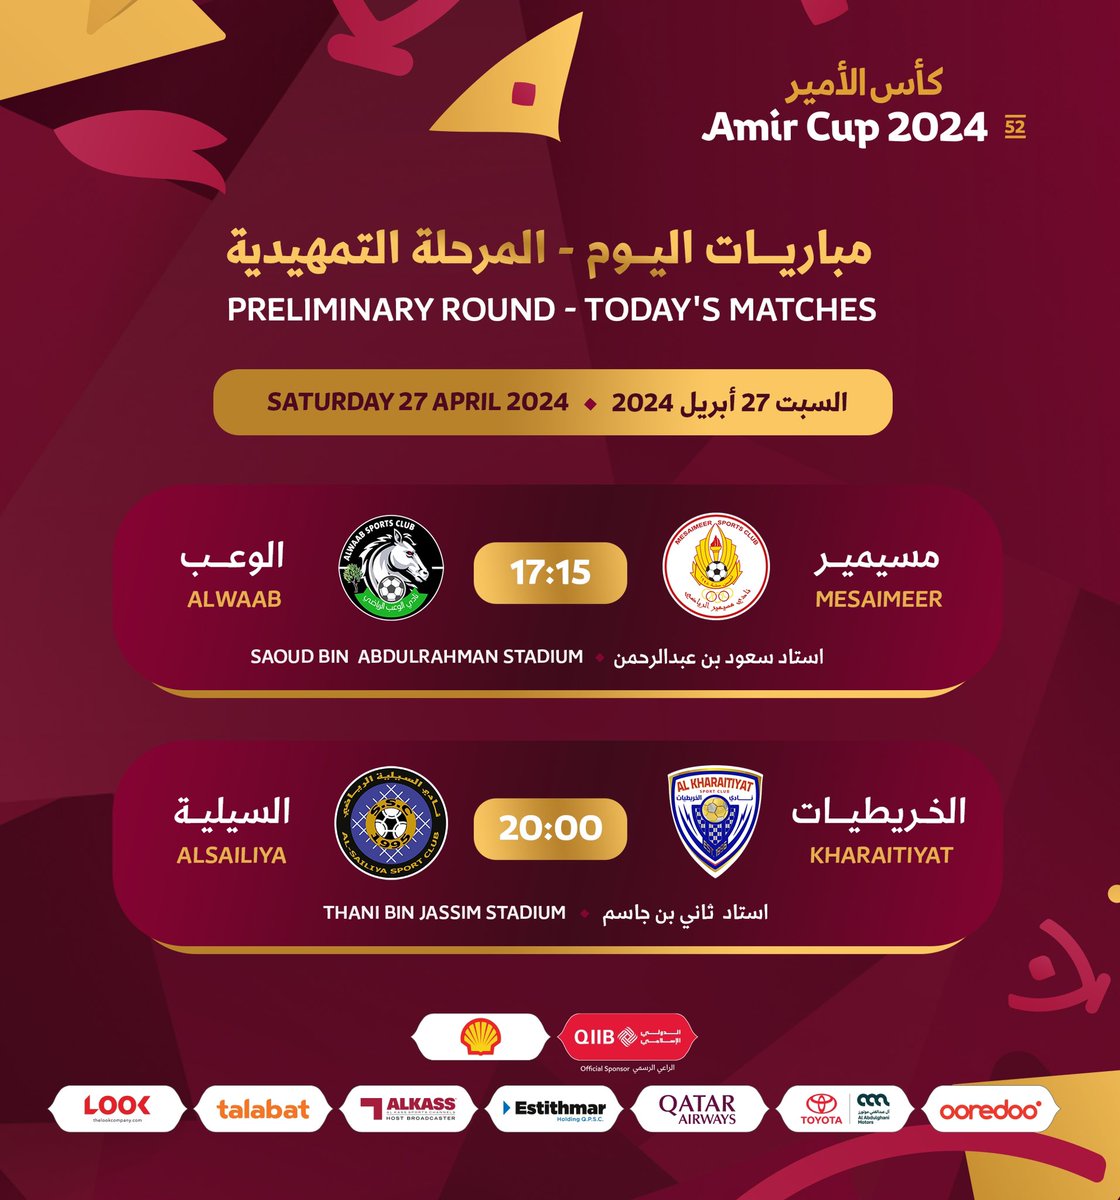 🗒 - Today's matches from the preliminary stage of #Amir_Cup 🏆.